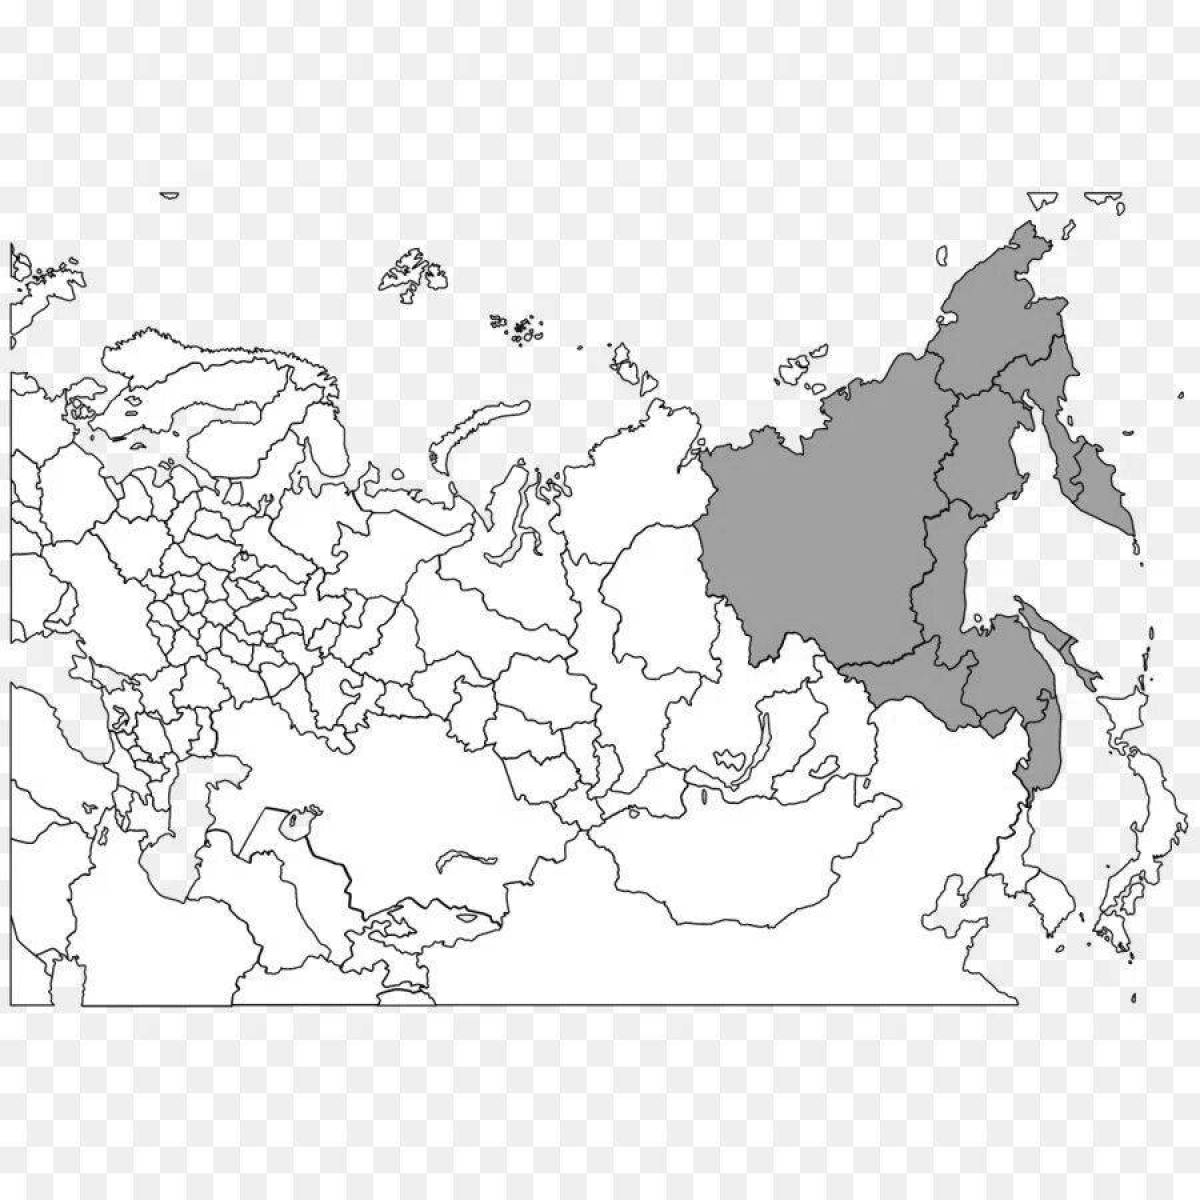 Coloring page great map of the ussr